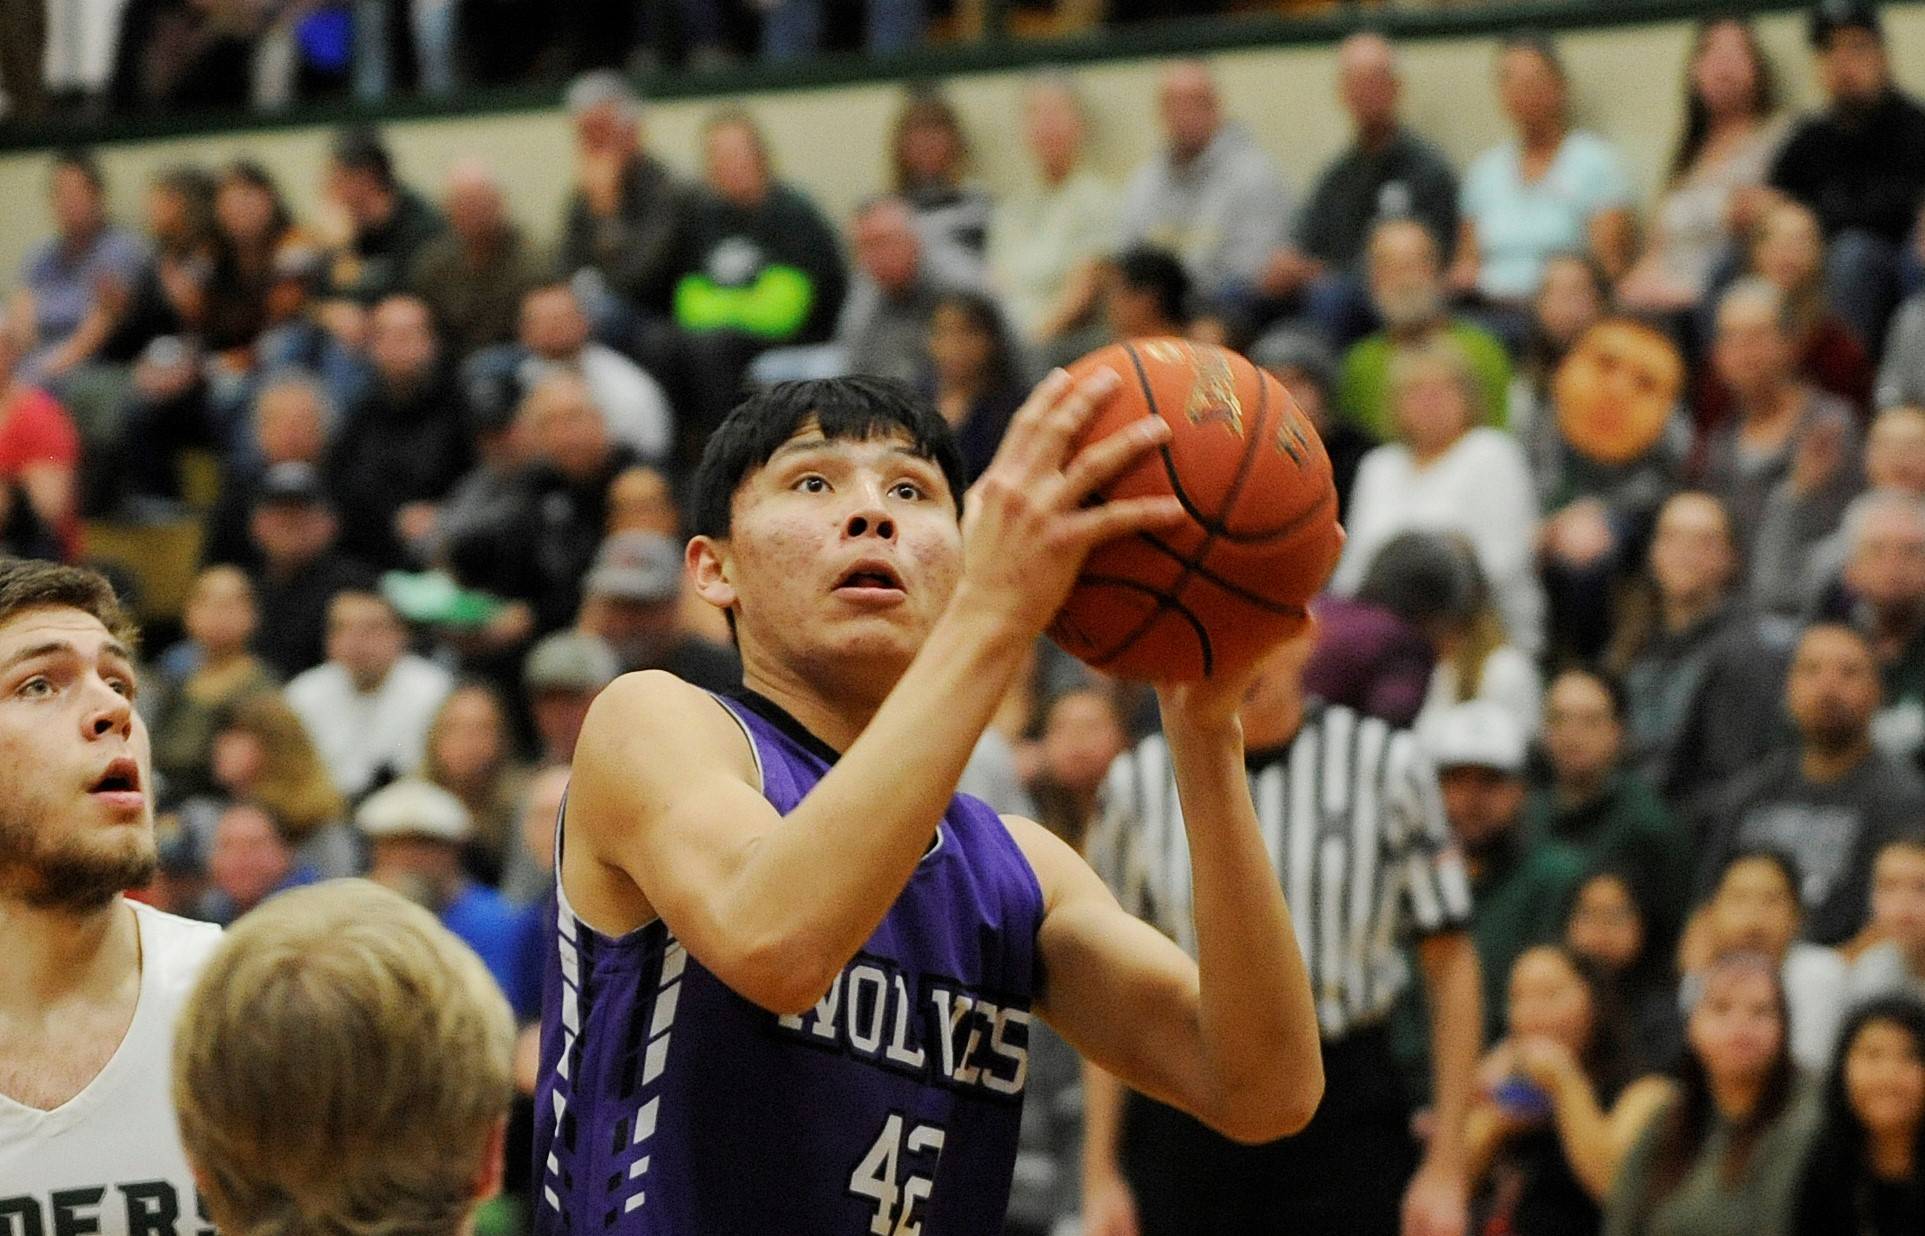 Christiansen, Moore picked for All-Peninsula boys hoops squad